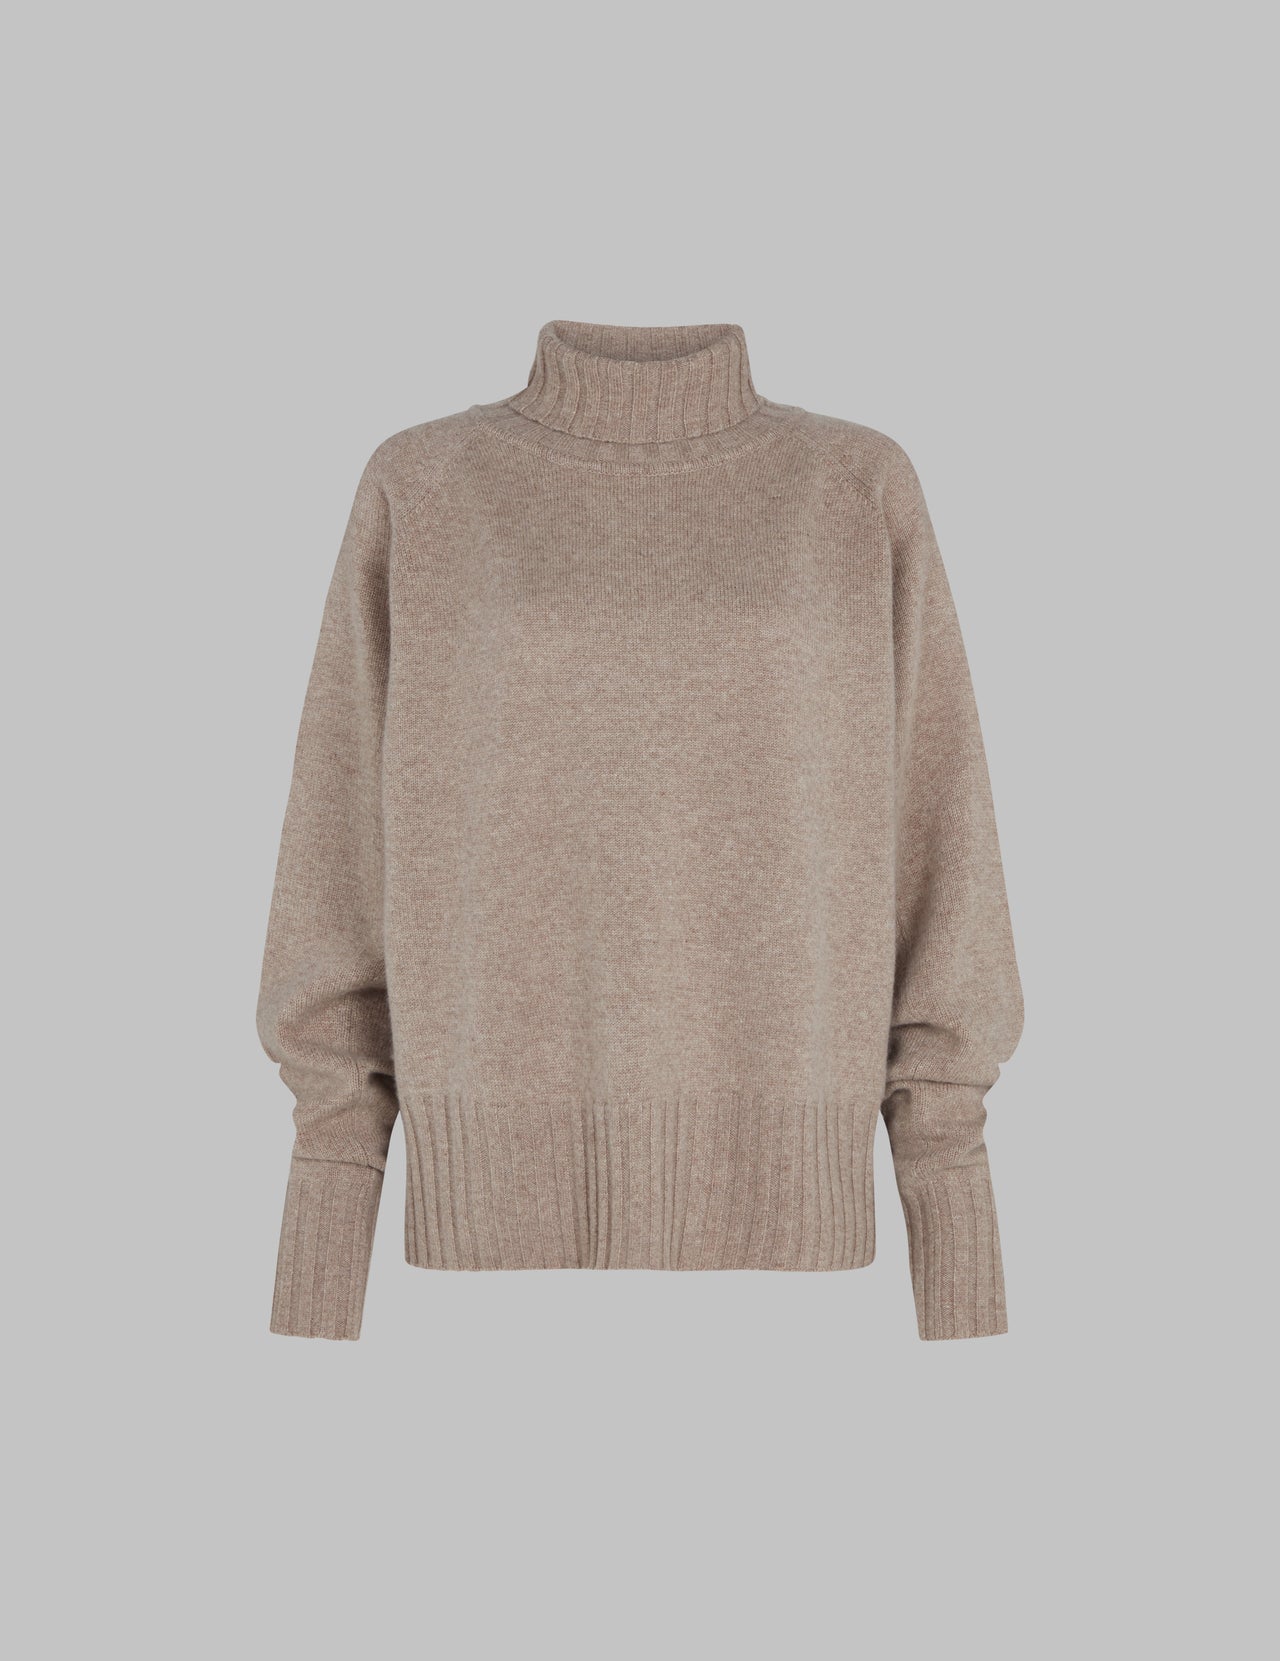  Toast Roll Neck Cashmere Sweater 